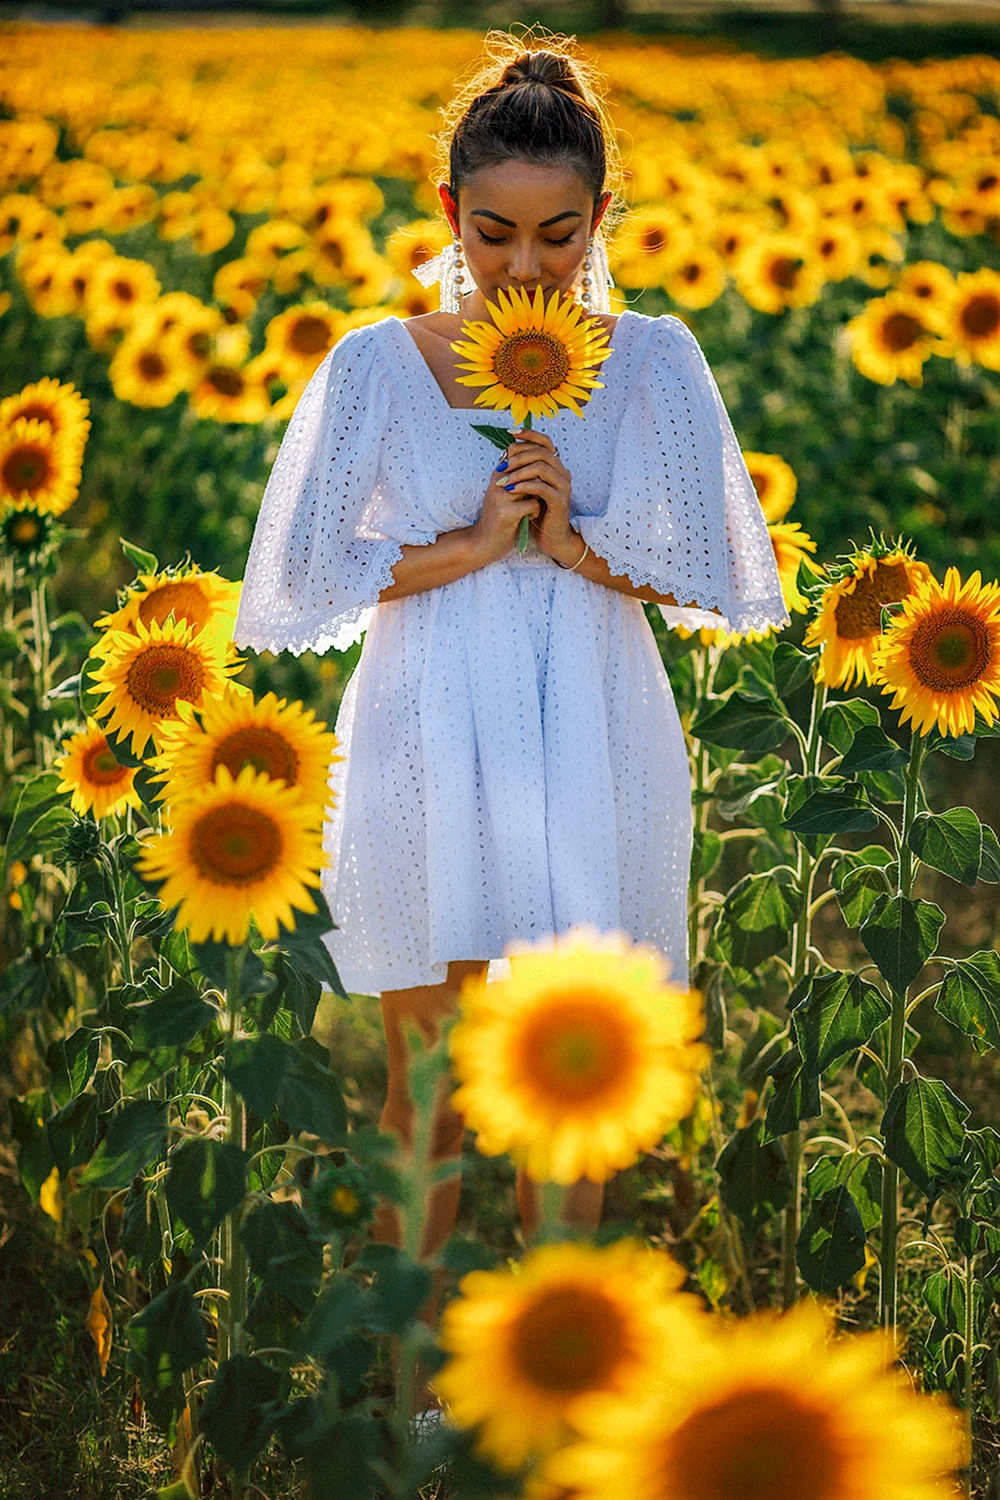 Woman smiling Sunflower